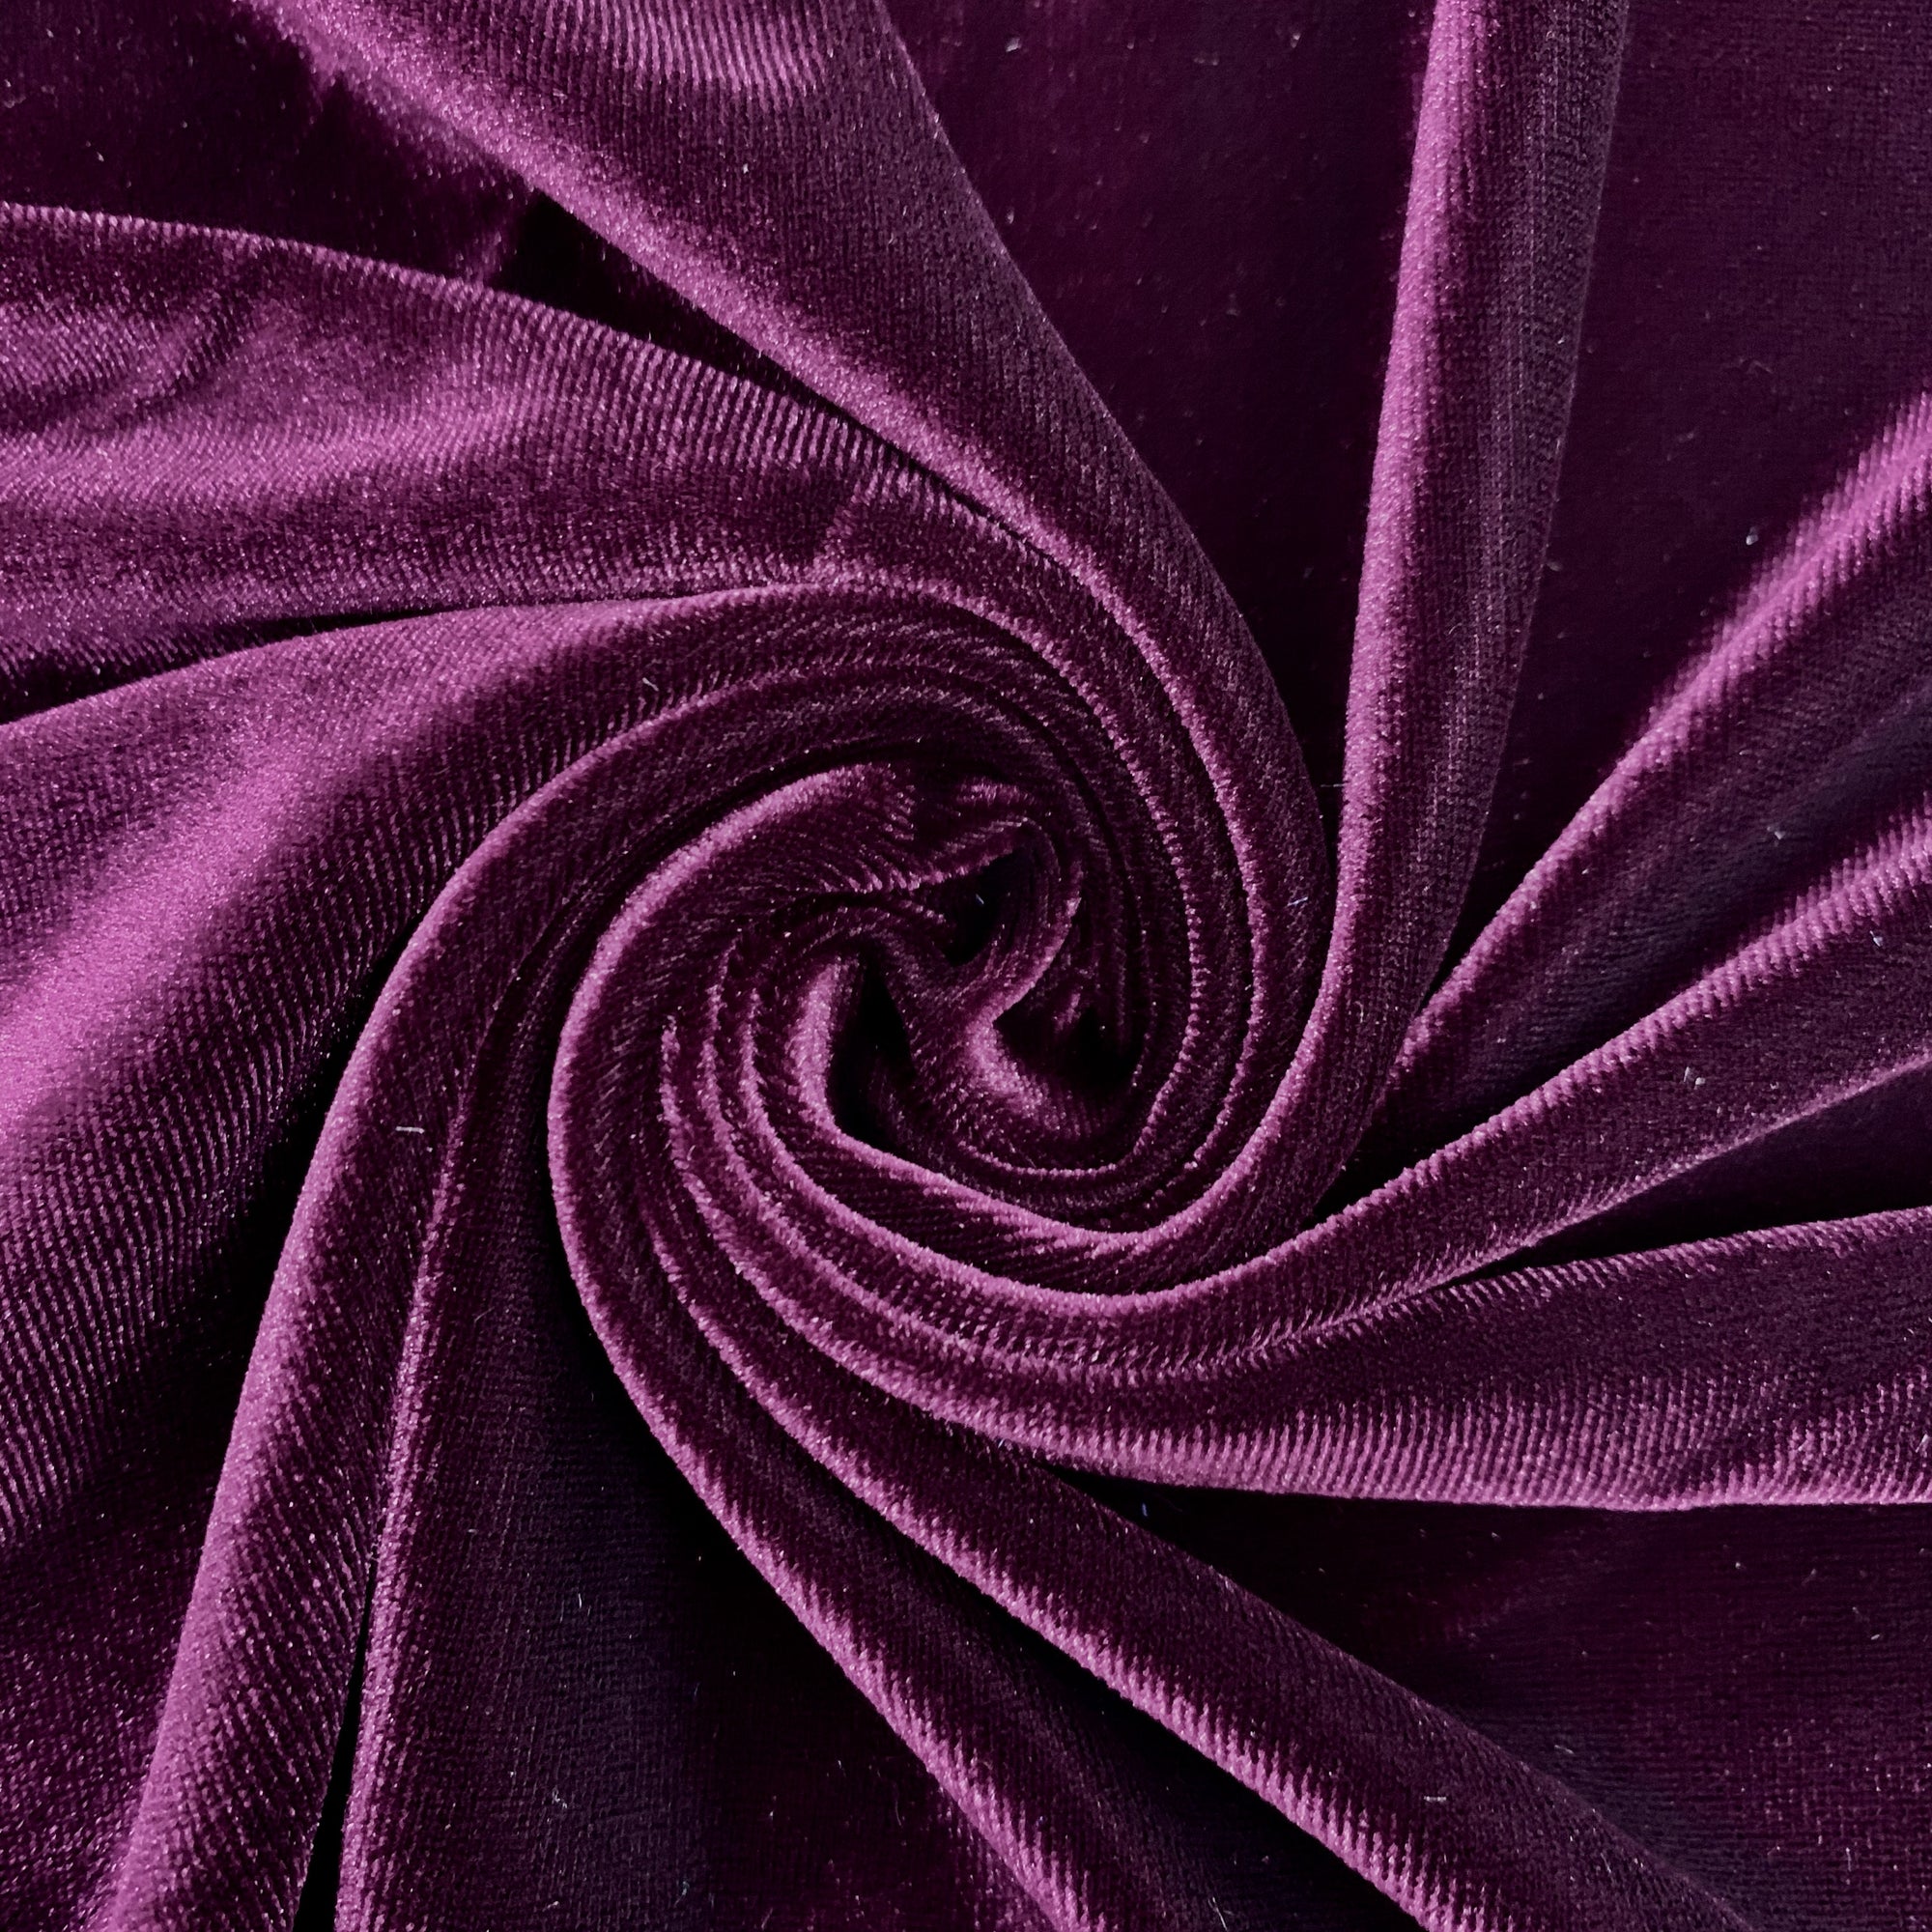 Princess EGGPLANT Polyester Stretch Velvet Fabric for Bows, Top Knots, Head Wraps, Scrunchies, Clothes, Costumes, Crafts